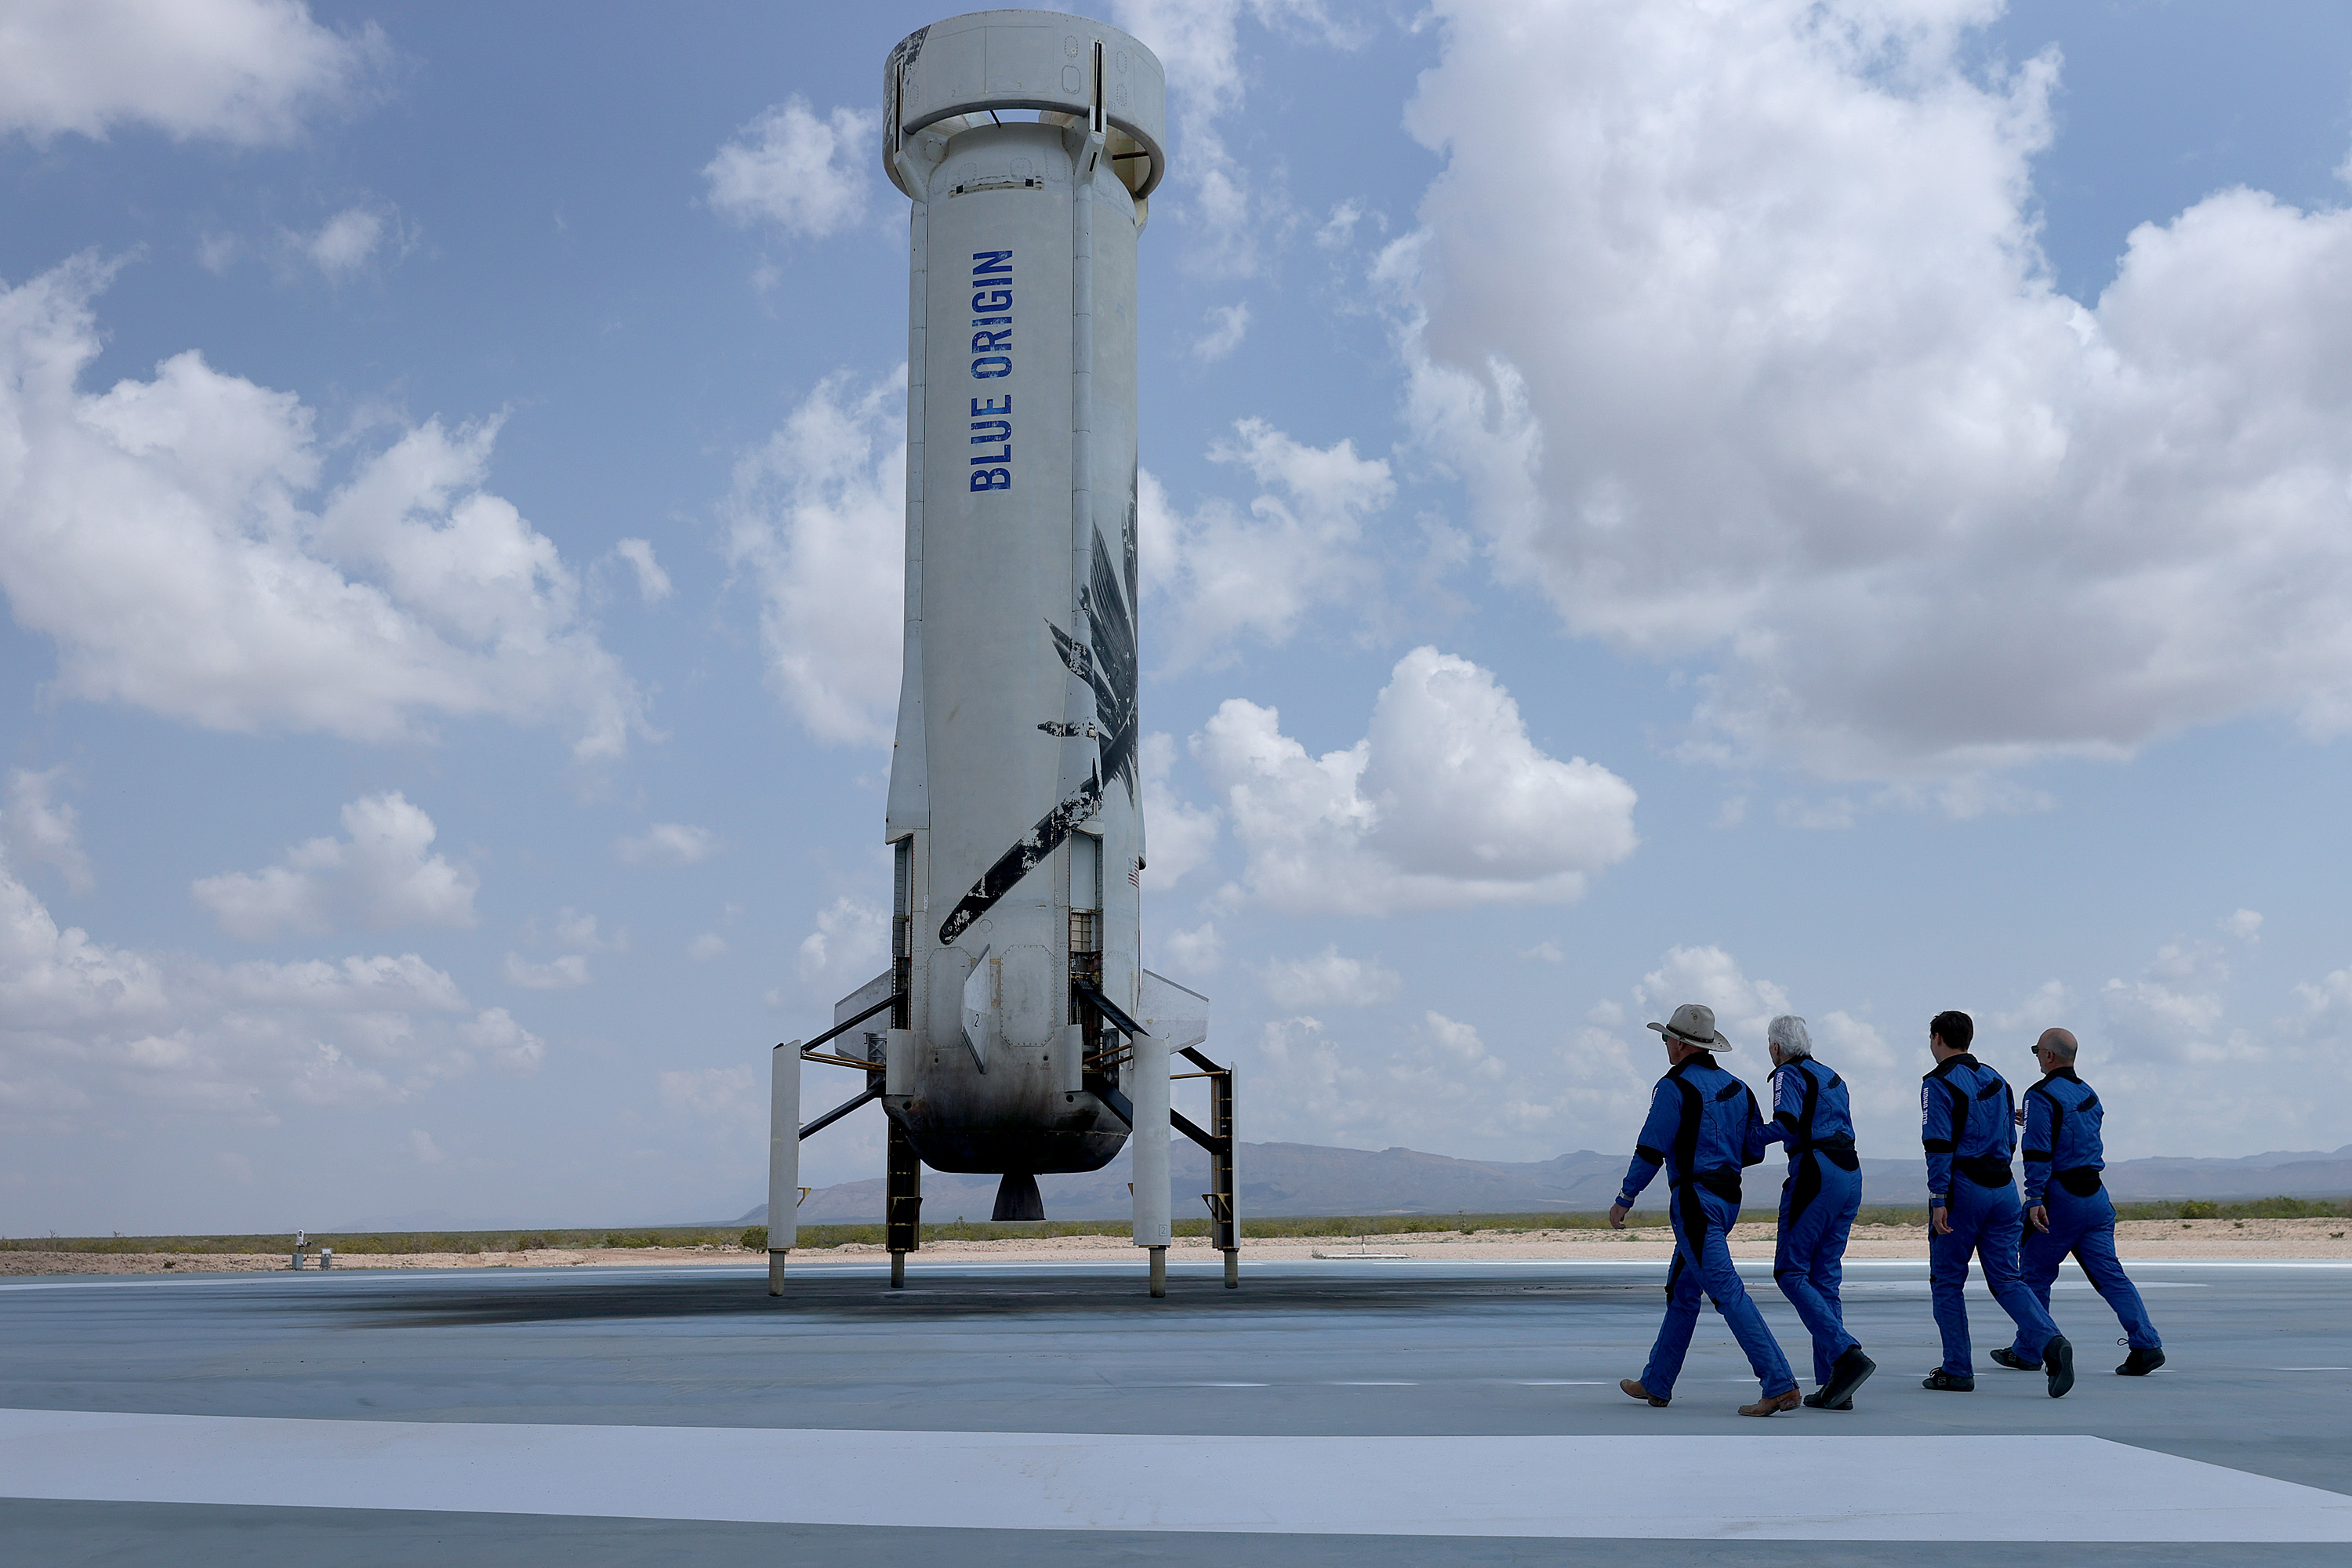 Blue Origin’s New Shepard crew Jeff Bezos, Wally Funk, Oliver Daemen, and Mark Bezos walk near the booster rocket to pose for a picture after their flight into space.